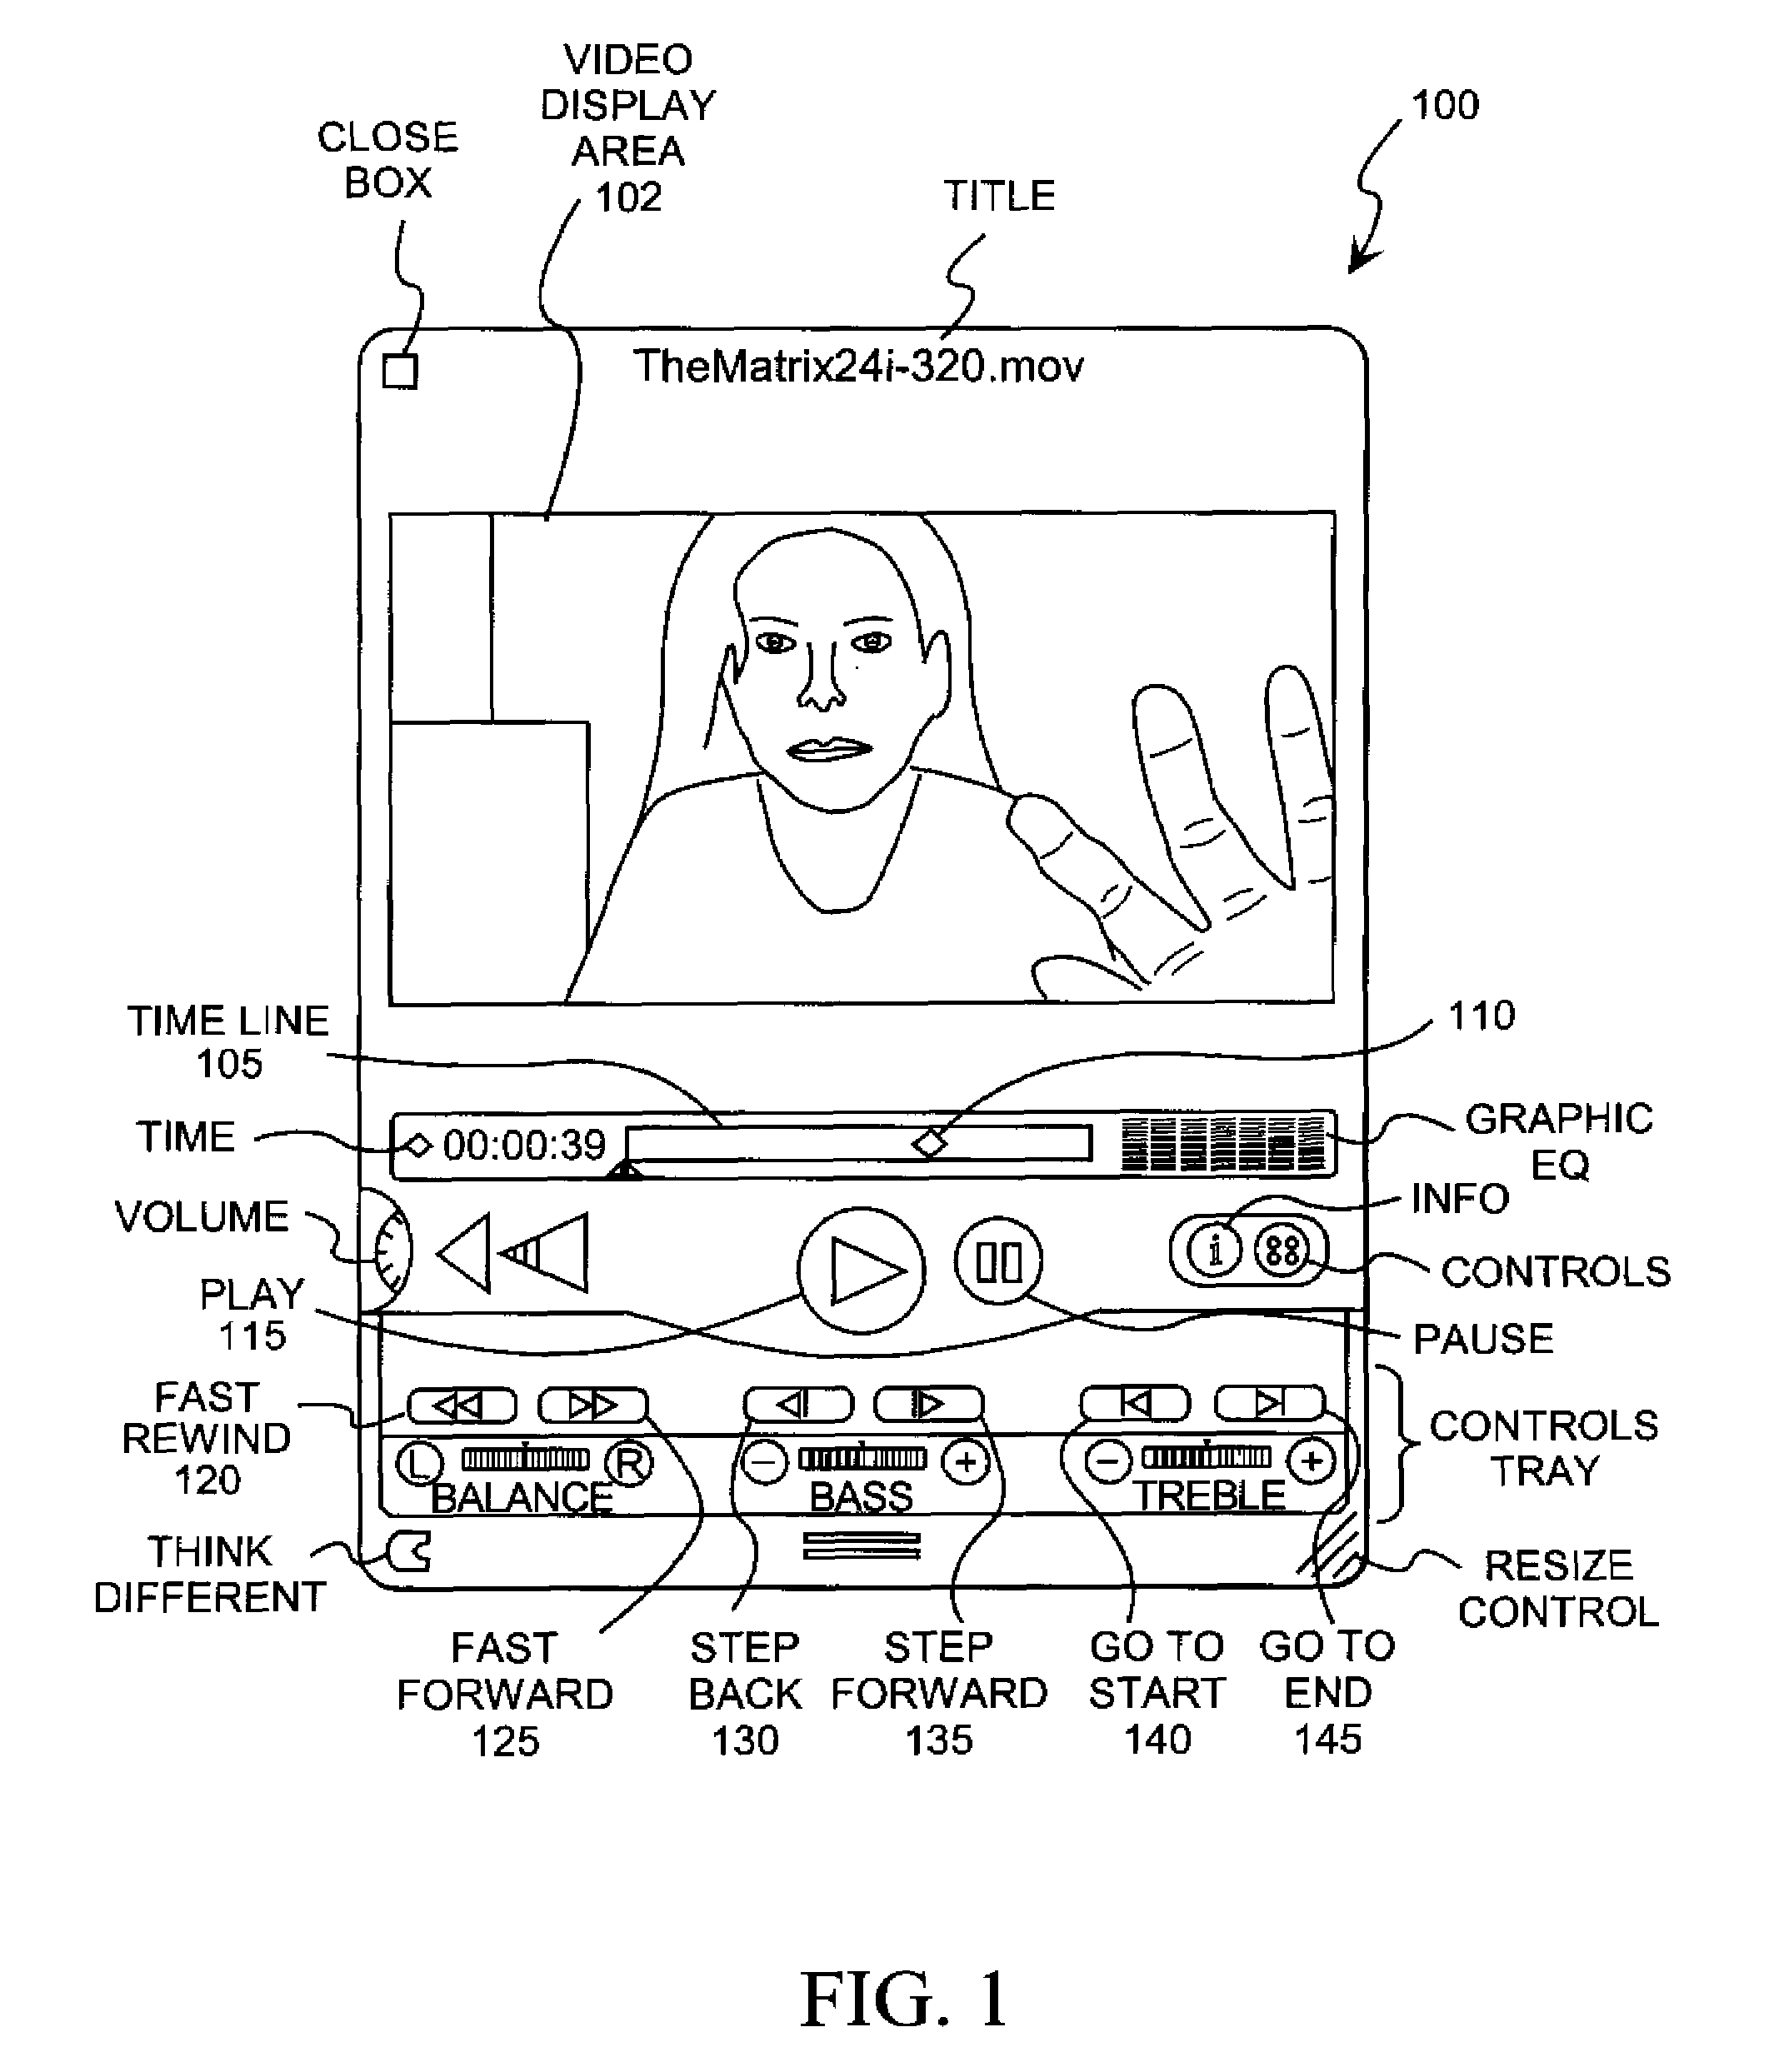 System and method for video access from notes or summaries